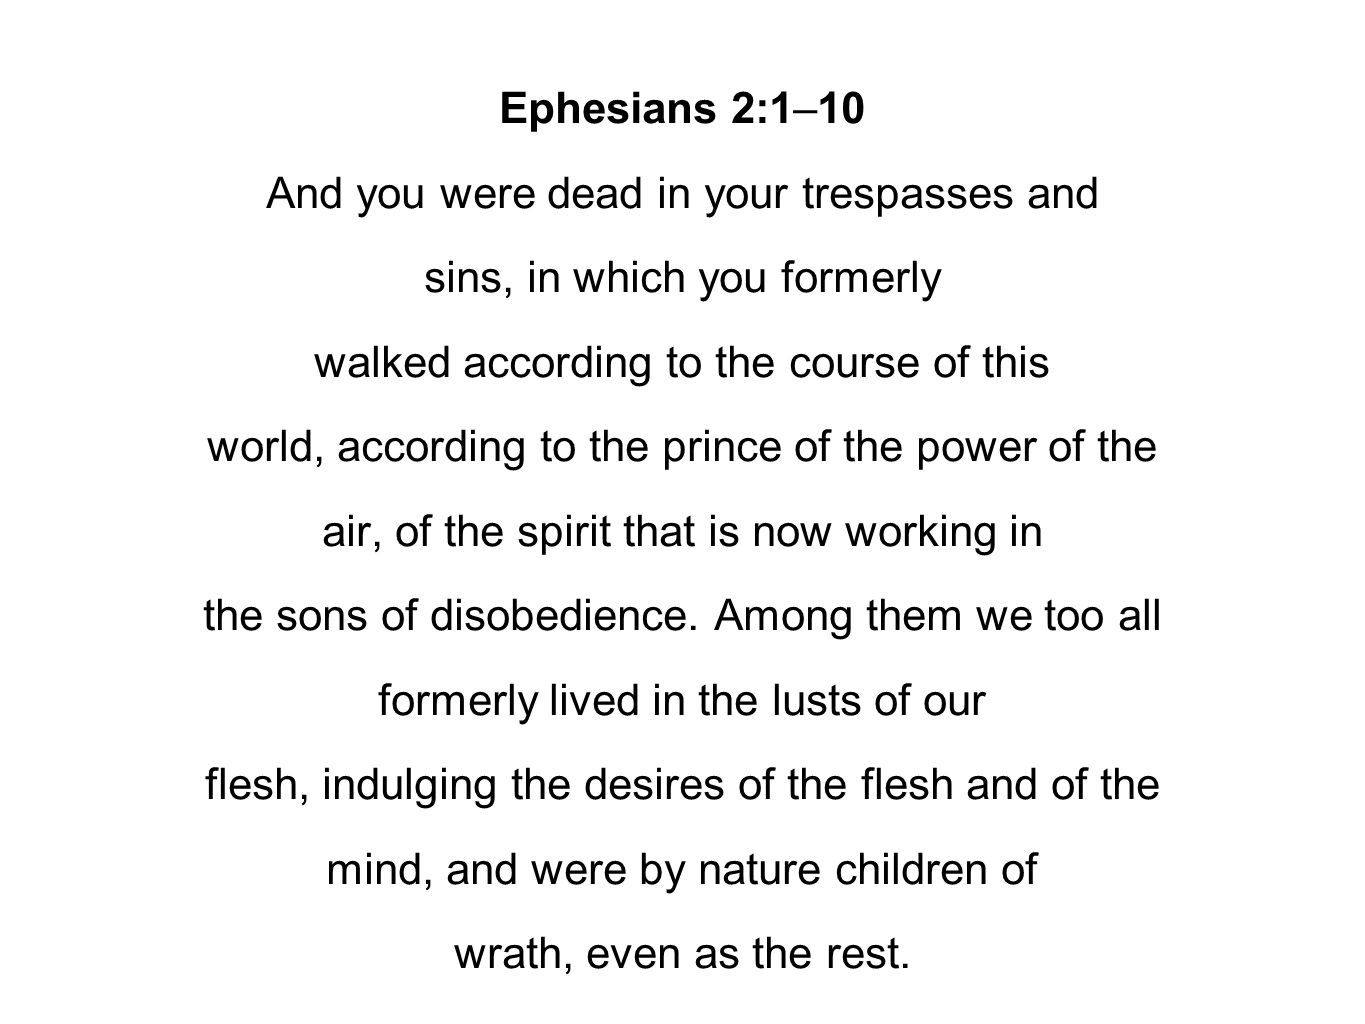 Ephesians 2:1–10 And you were dead in your trespasses and sins, in which you formerly walked according to the course of this world, according to the prince of the power of the air, of the spirit that is now working in the sons of disobedience.